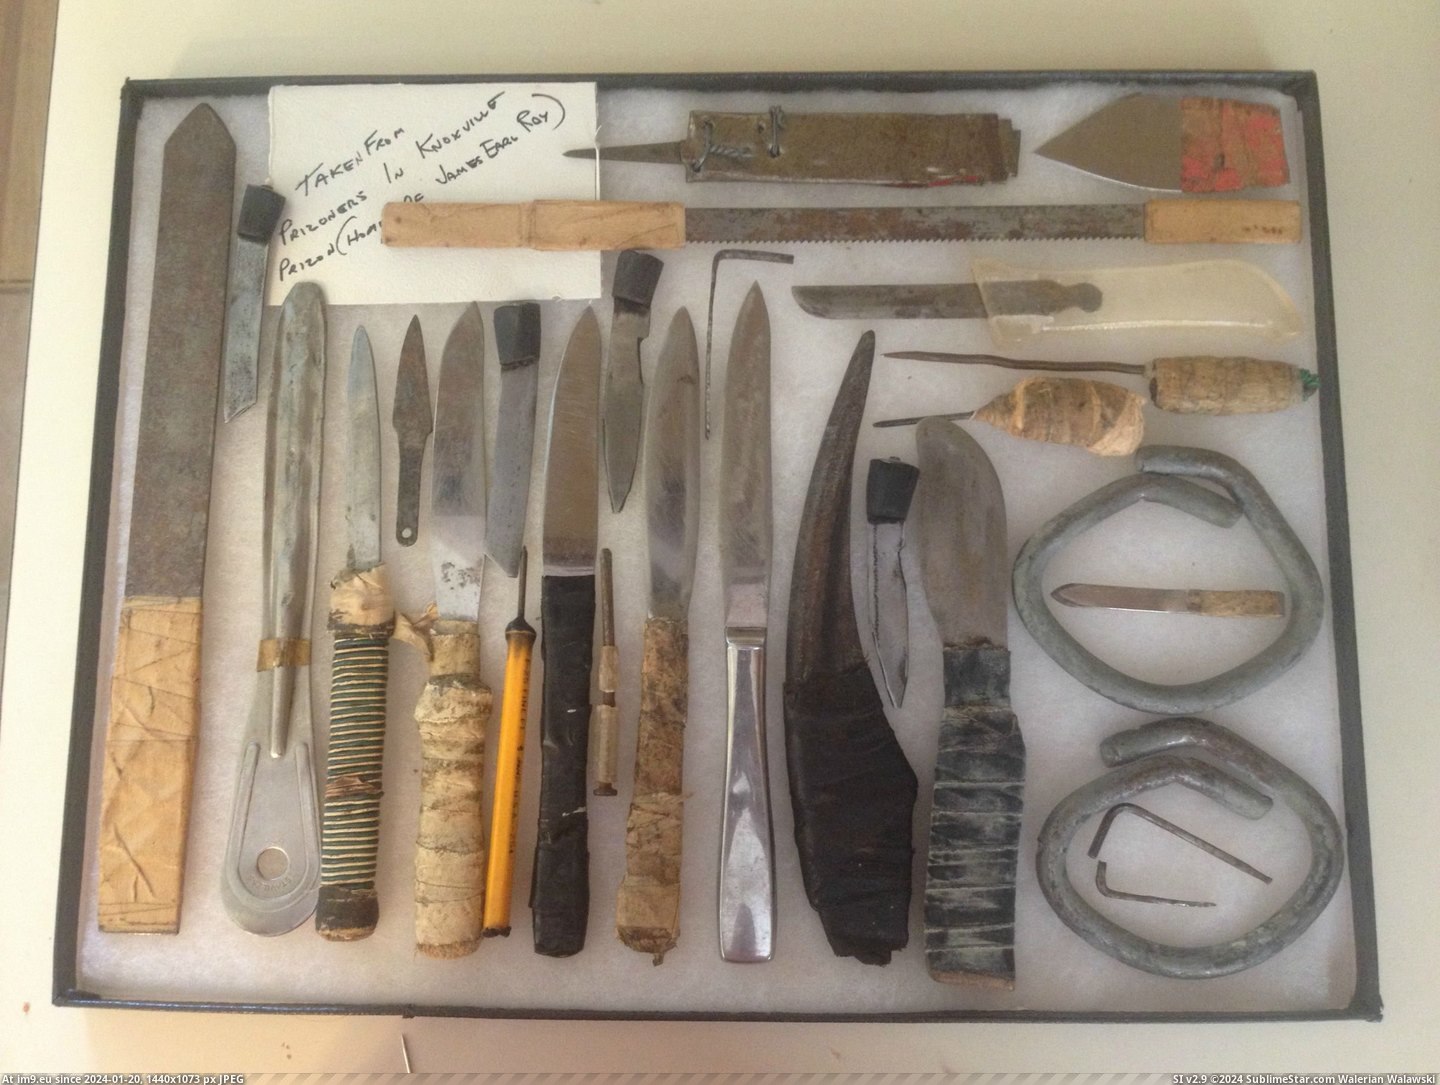 #Collection #Wtf #Shanks #Prison #Confiscated [Wtf] My collection of confiscated prison shanks Pic. (Image of album My r/WTF favs))